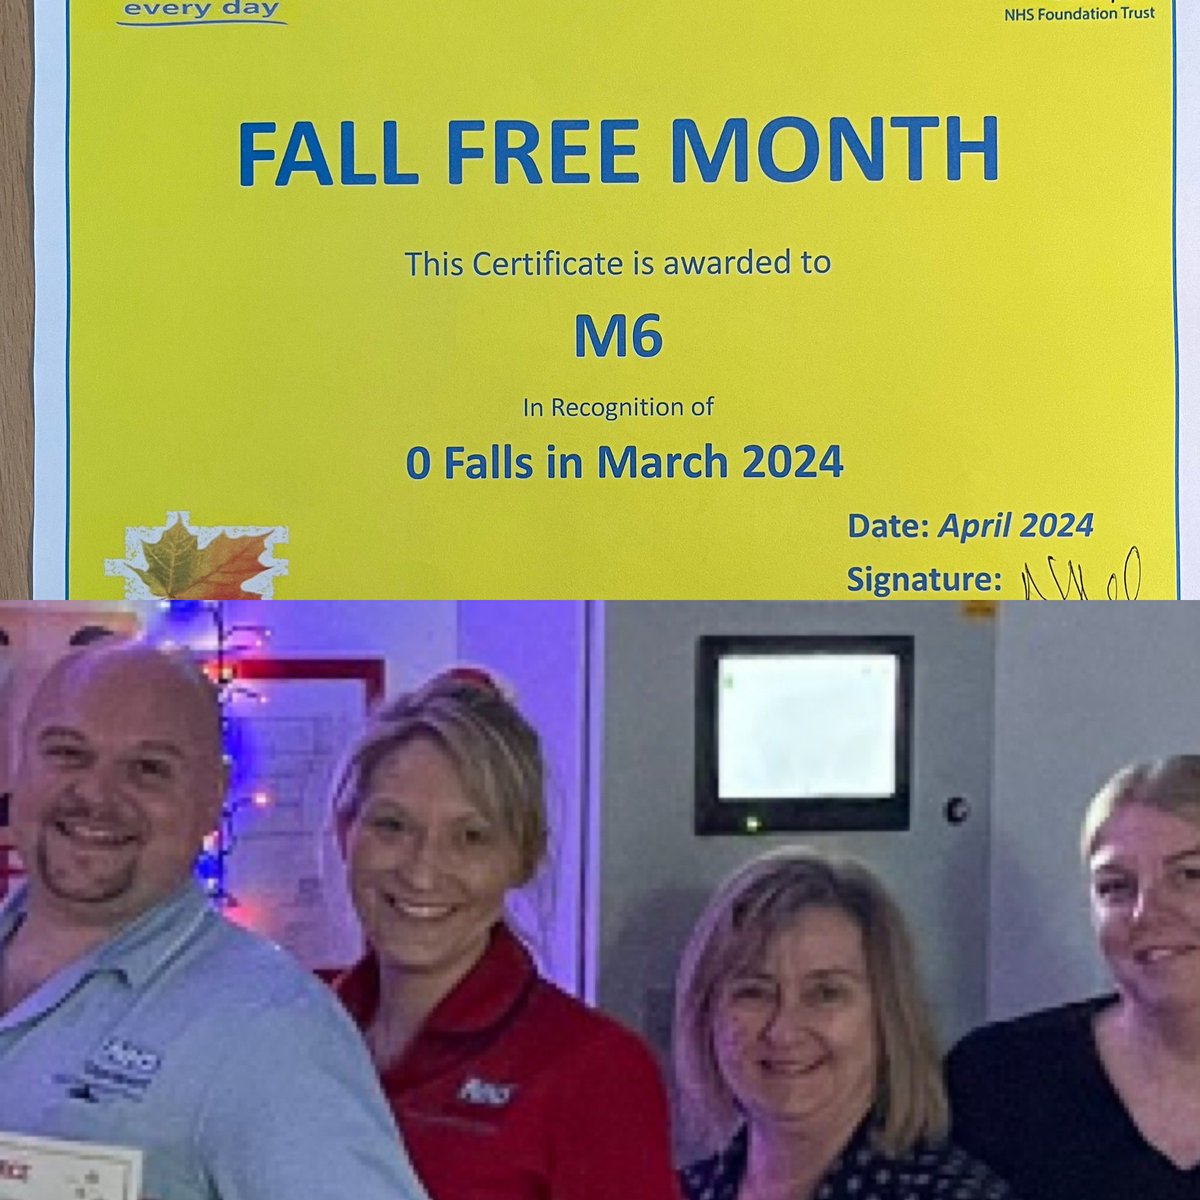 Time to celebrate 0 falls in March @StockportNHS well done M6 @helshow1 @NicolaFirth6 @AoifeIsherwood @StockportPtExp @lee_woolfe @MarisaLoganWar1 @falls_network @nhsdavies @Pollybegum3 @iainArogers @ChrisOL05142560 @SueACarroll 🍁🍁🍁🍁